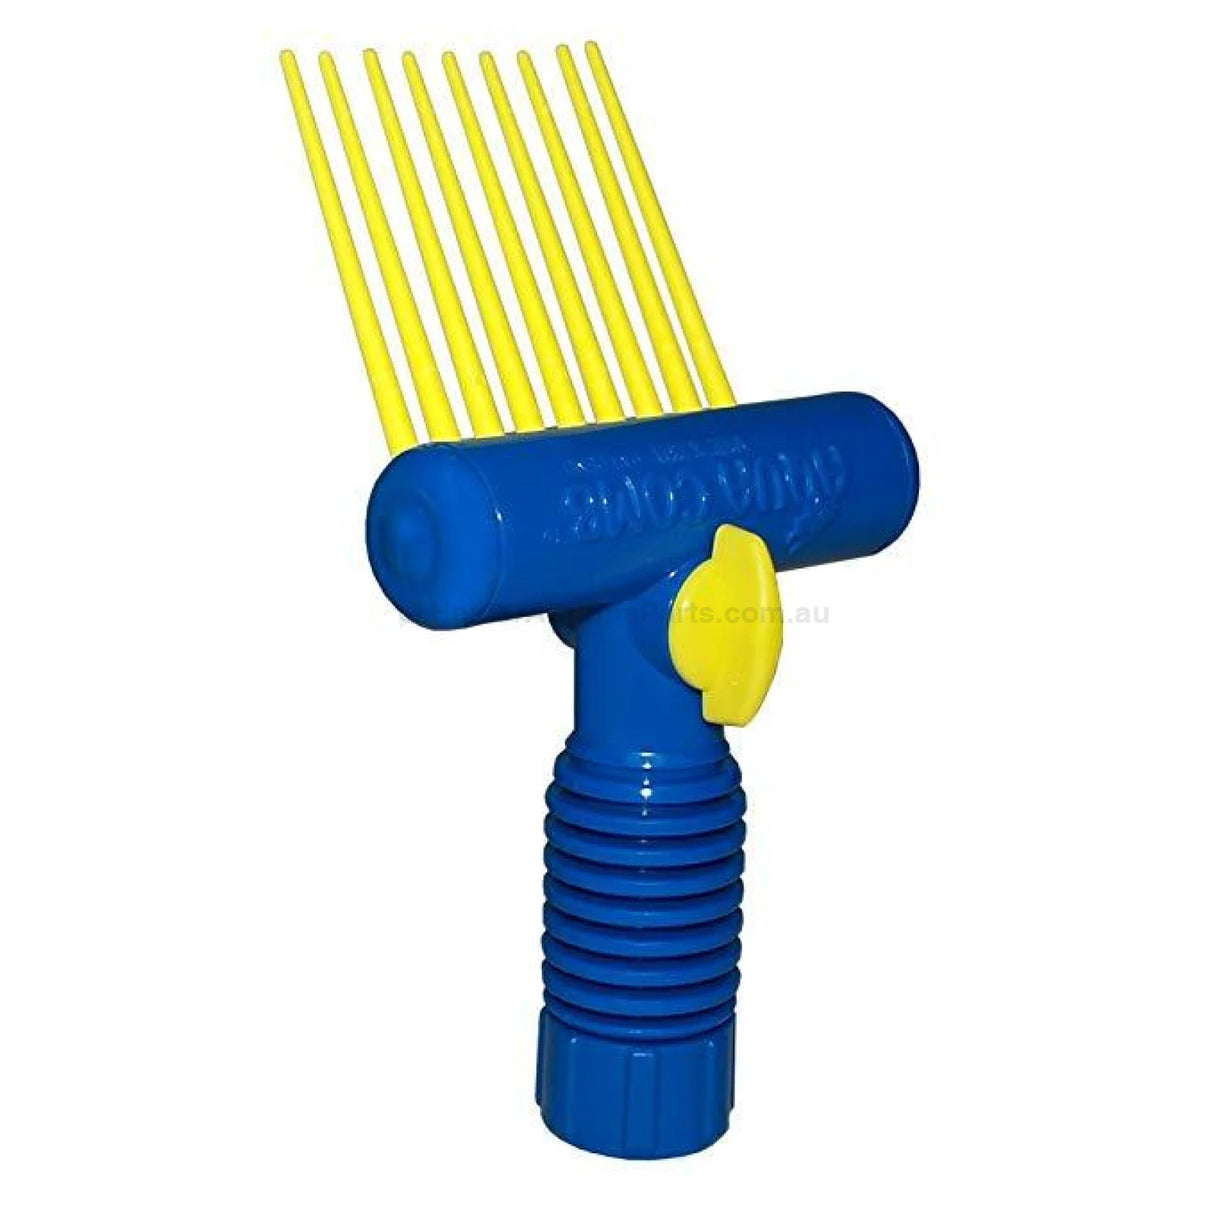 Aqua Comb - filter cartridge cleaner for spas and pools - Heater and Spa Parts